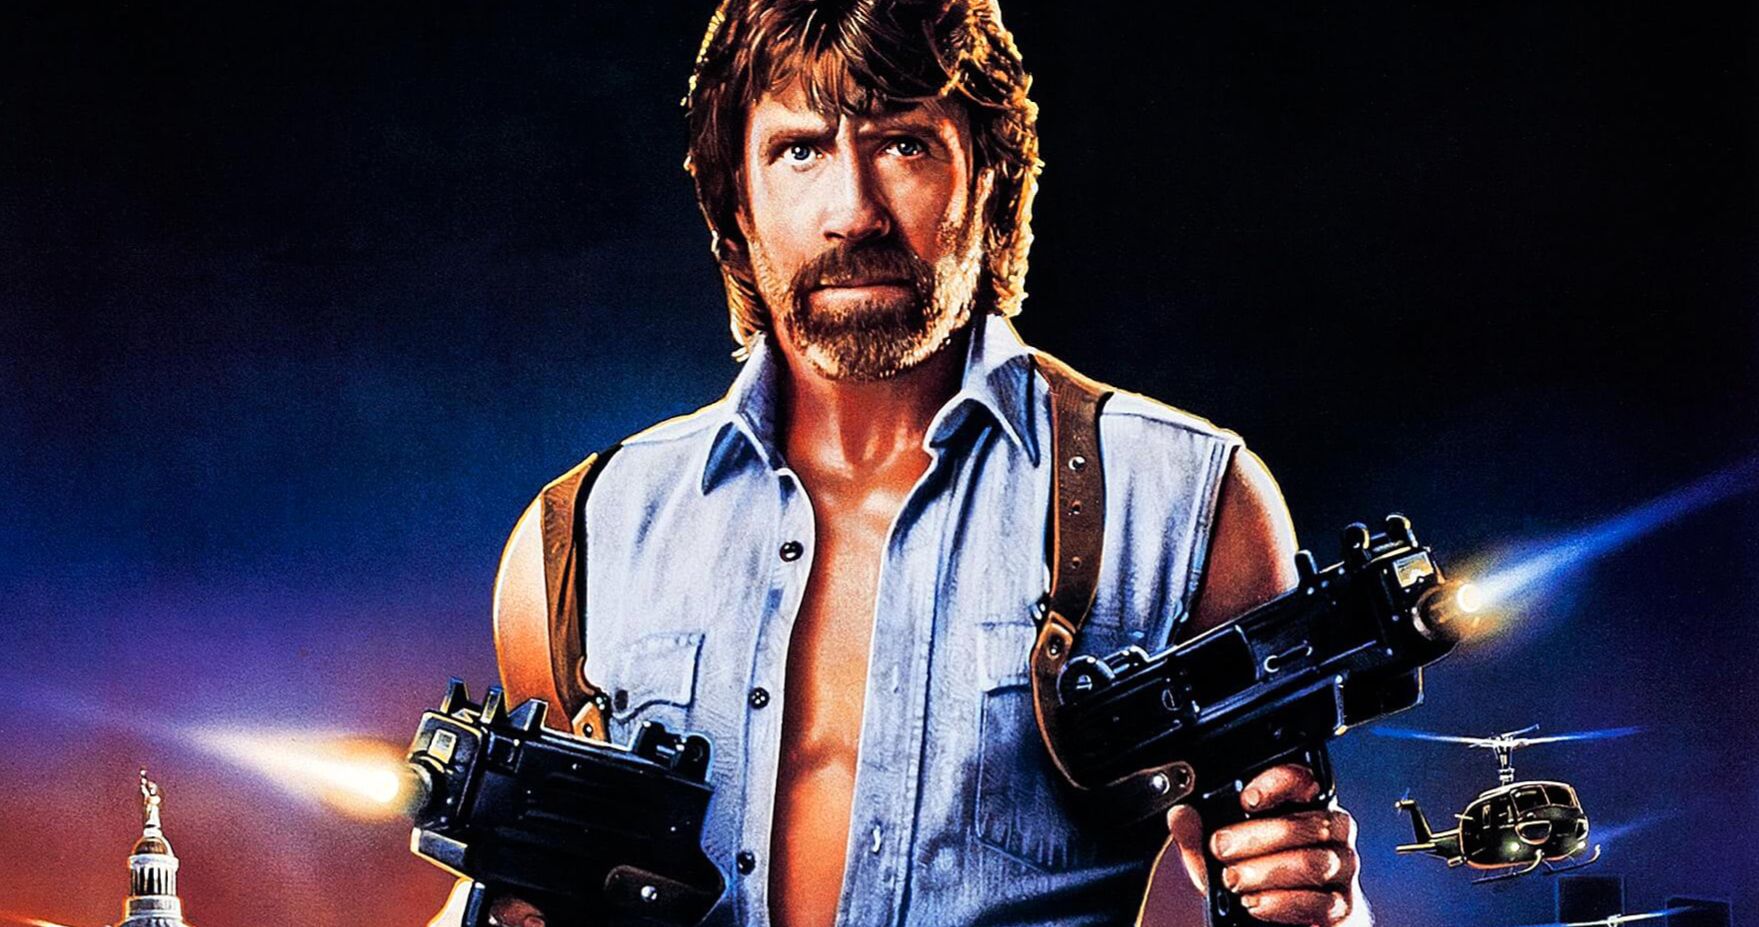 Chuck Norris Fans Celebrate the Action Icon's 80th Birthday on Twitter